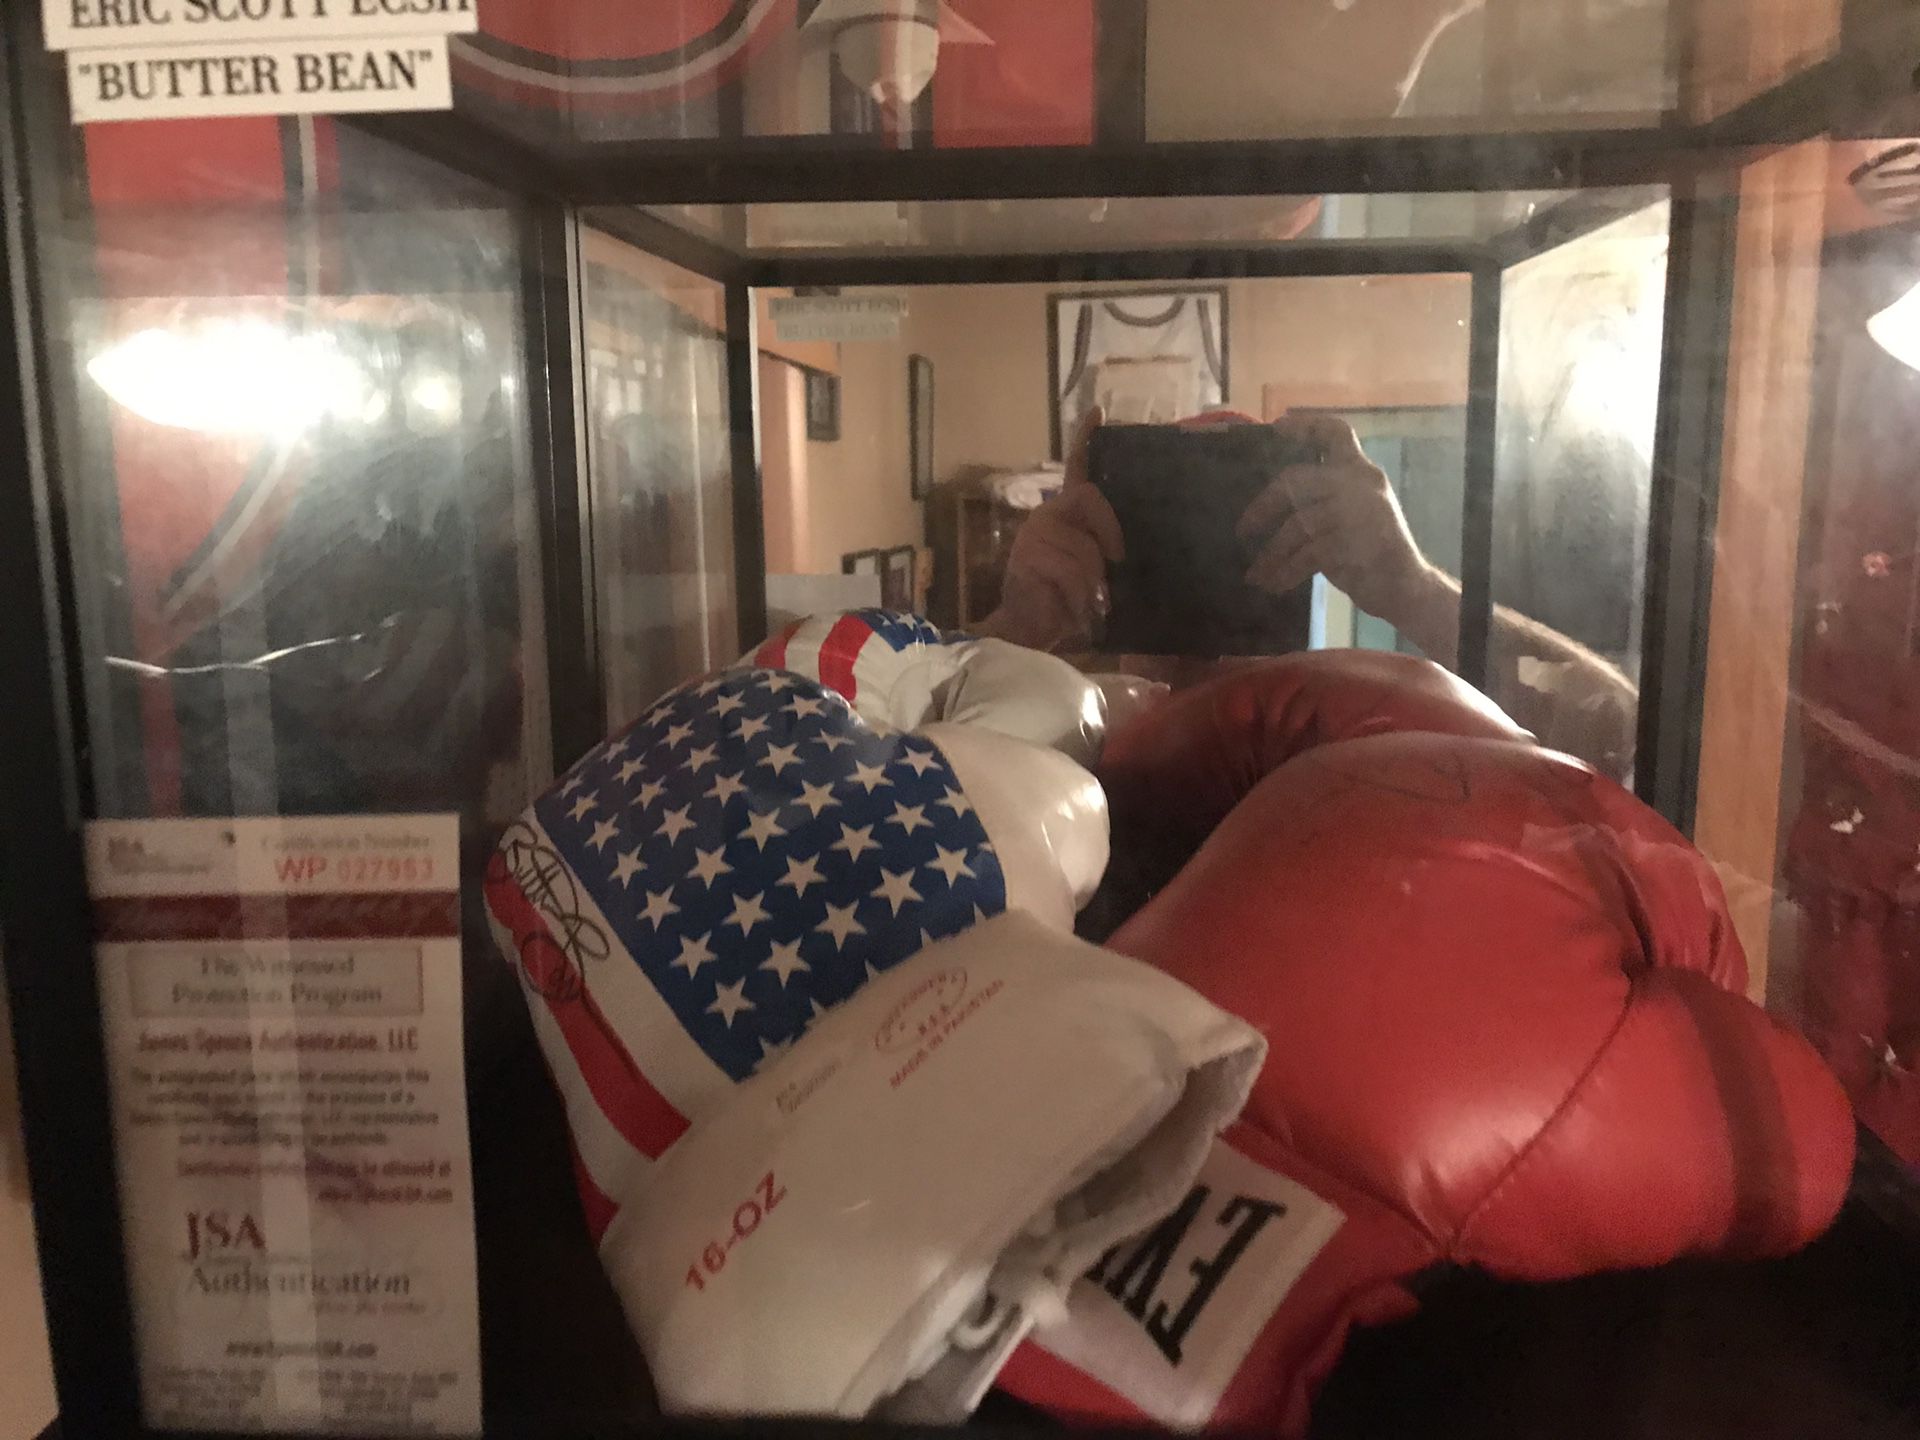 Signed butterbean and ray Mancini gloves